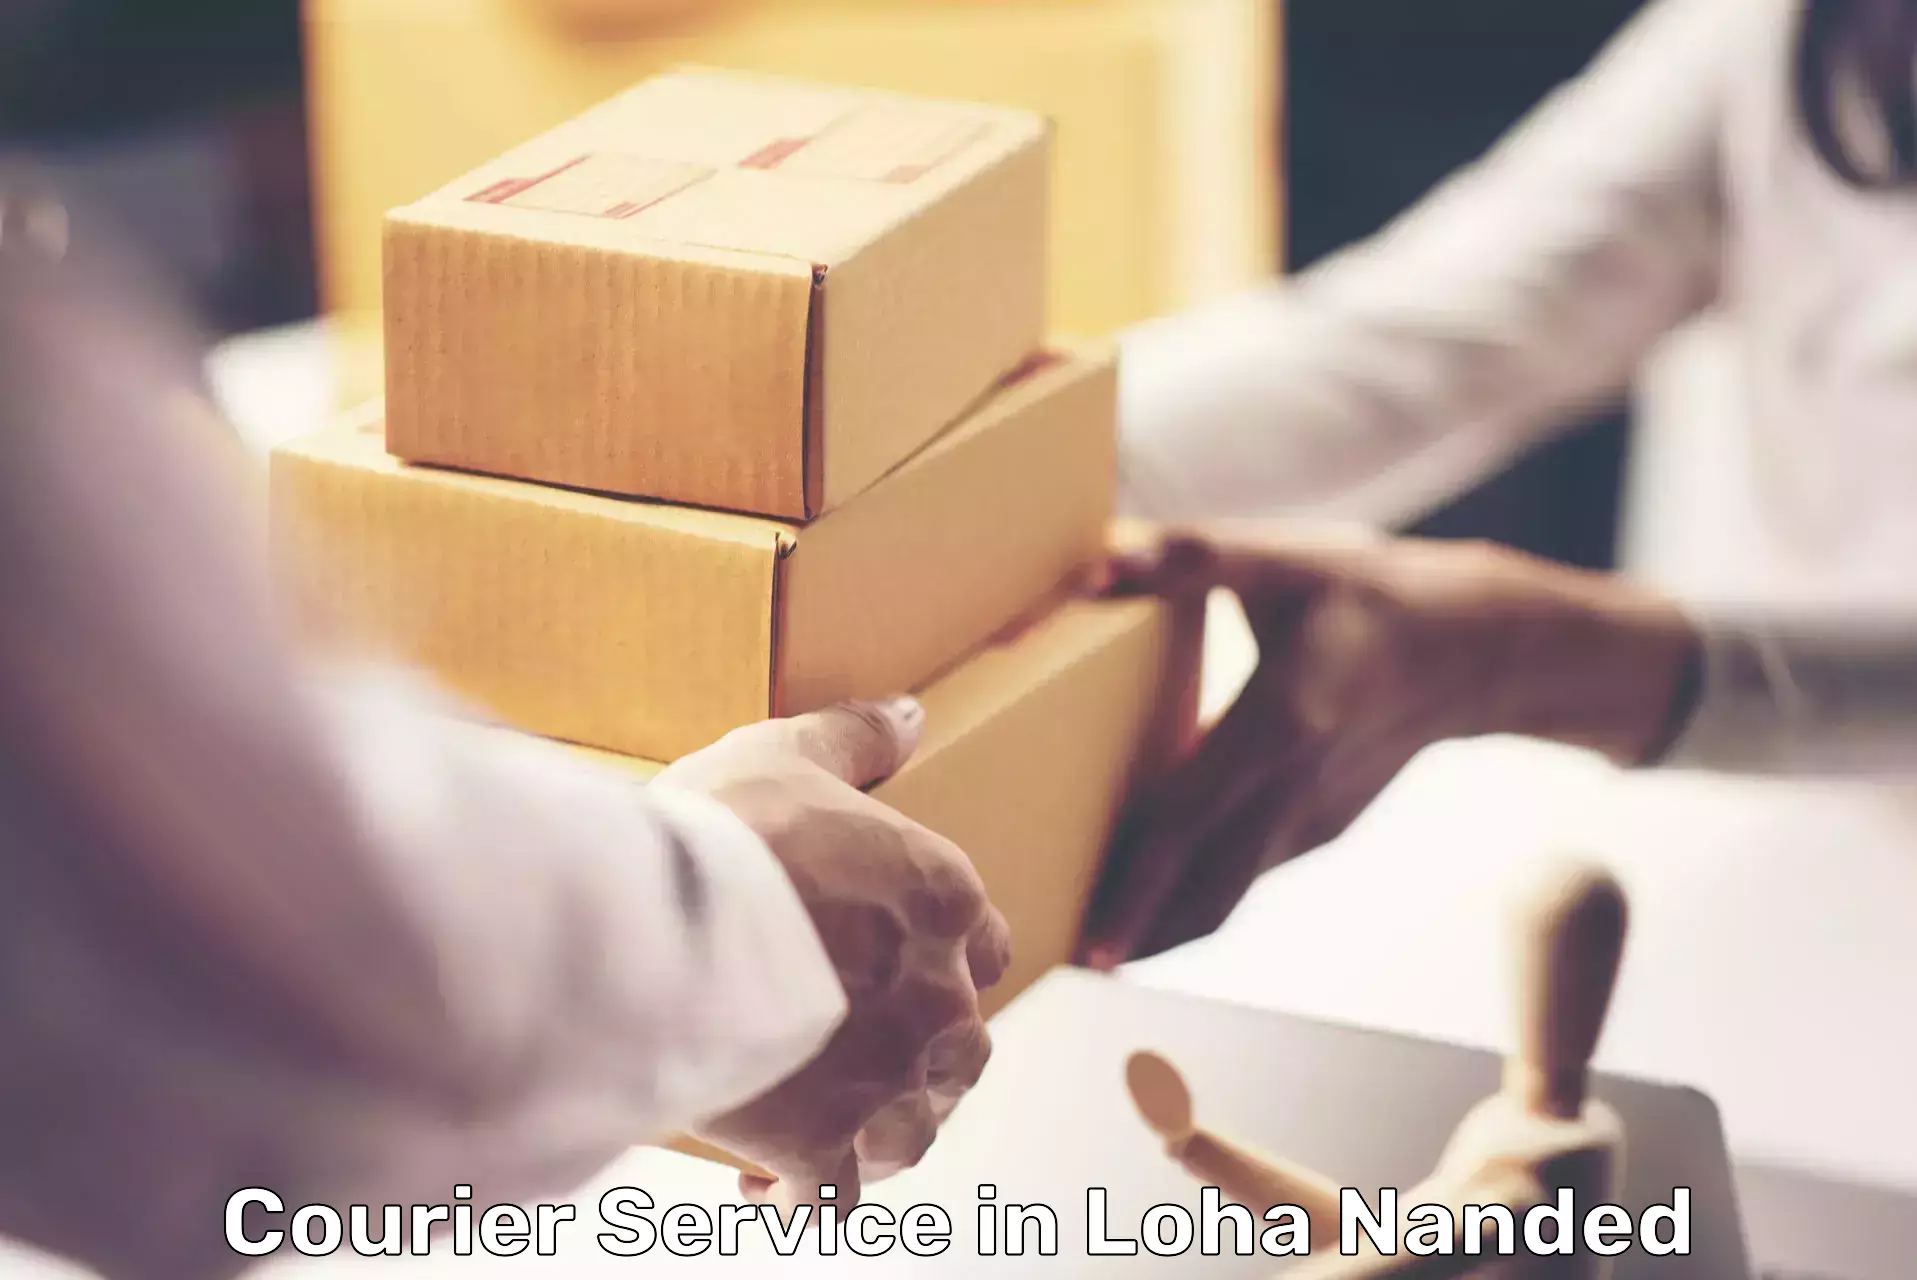 High-quality delivery services in Loha Nanded